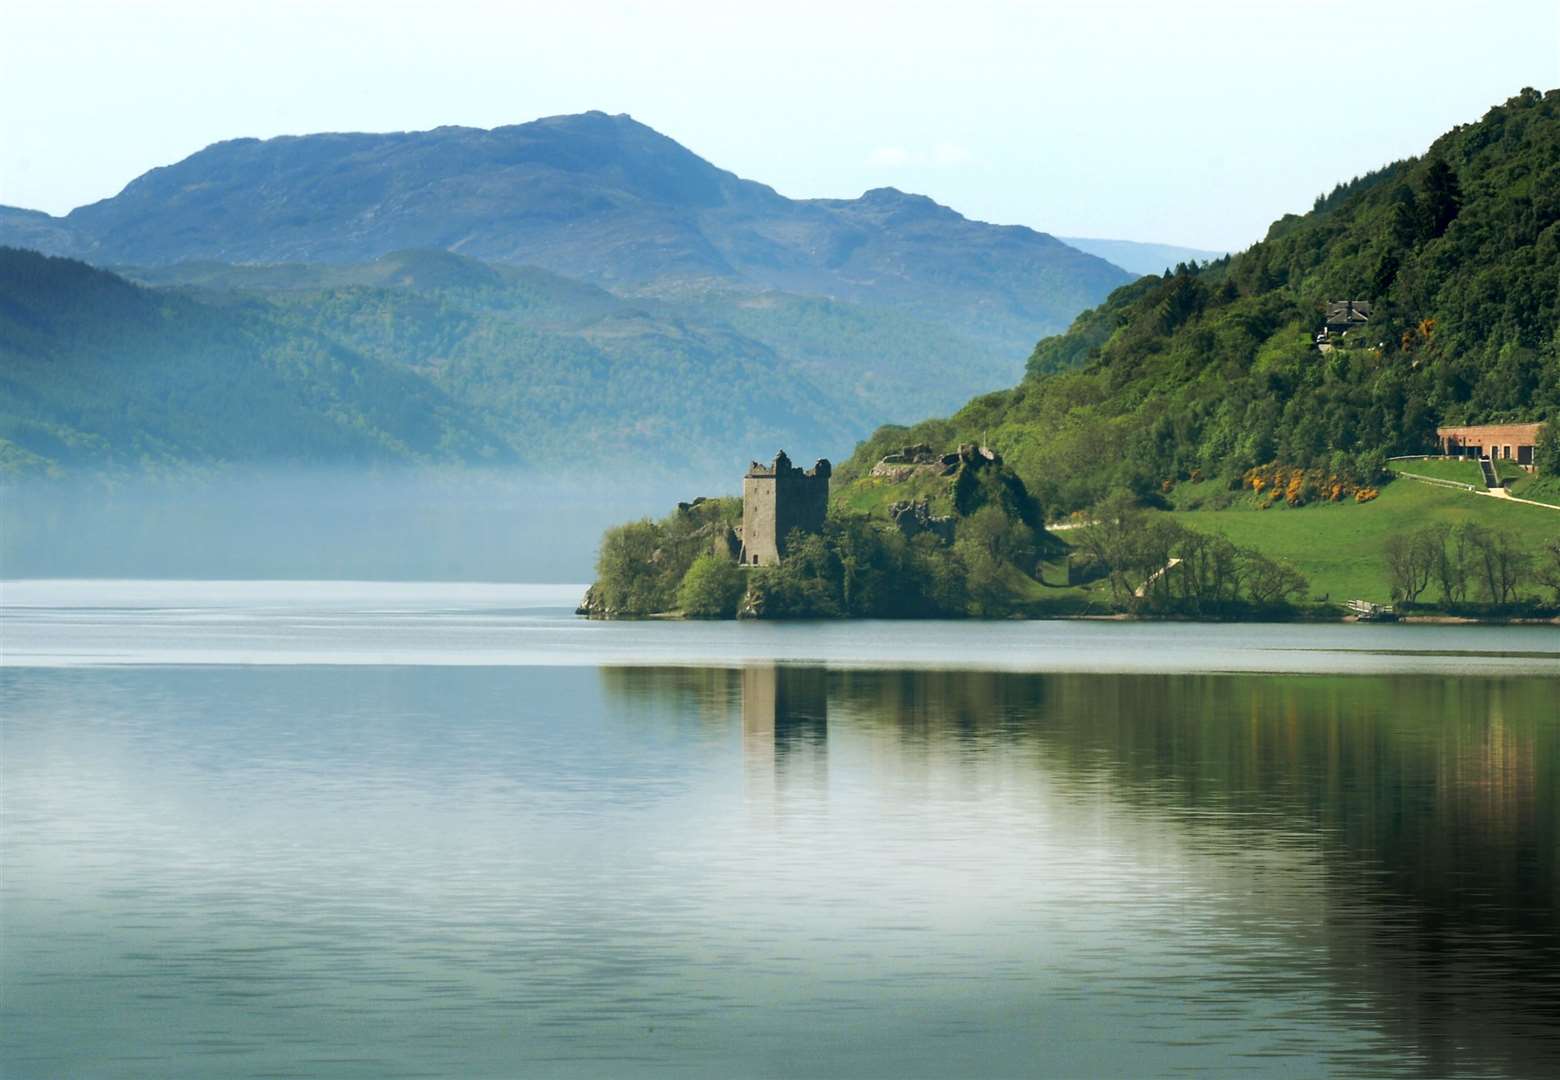 Sightings of a mysterious creature on Loch Ness have been reported since 565.